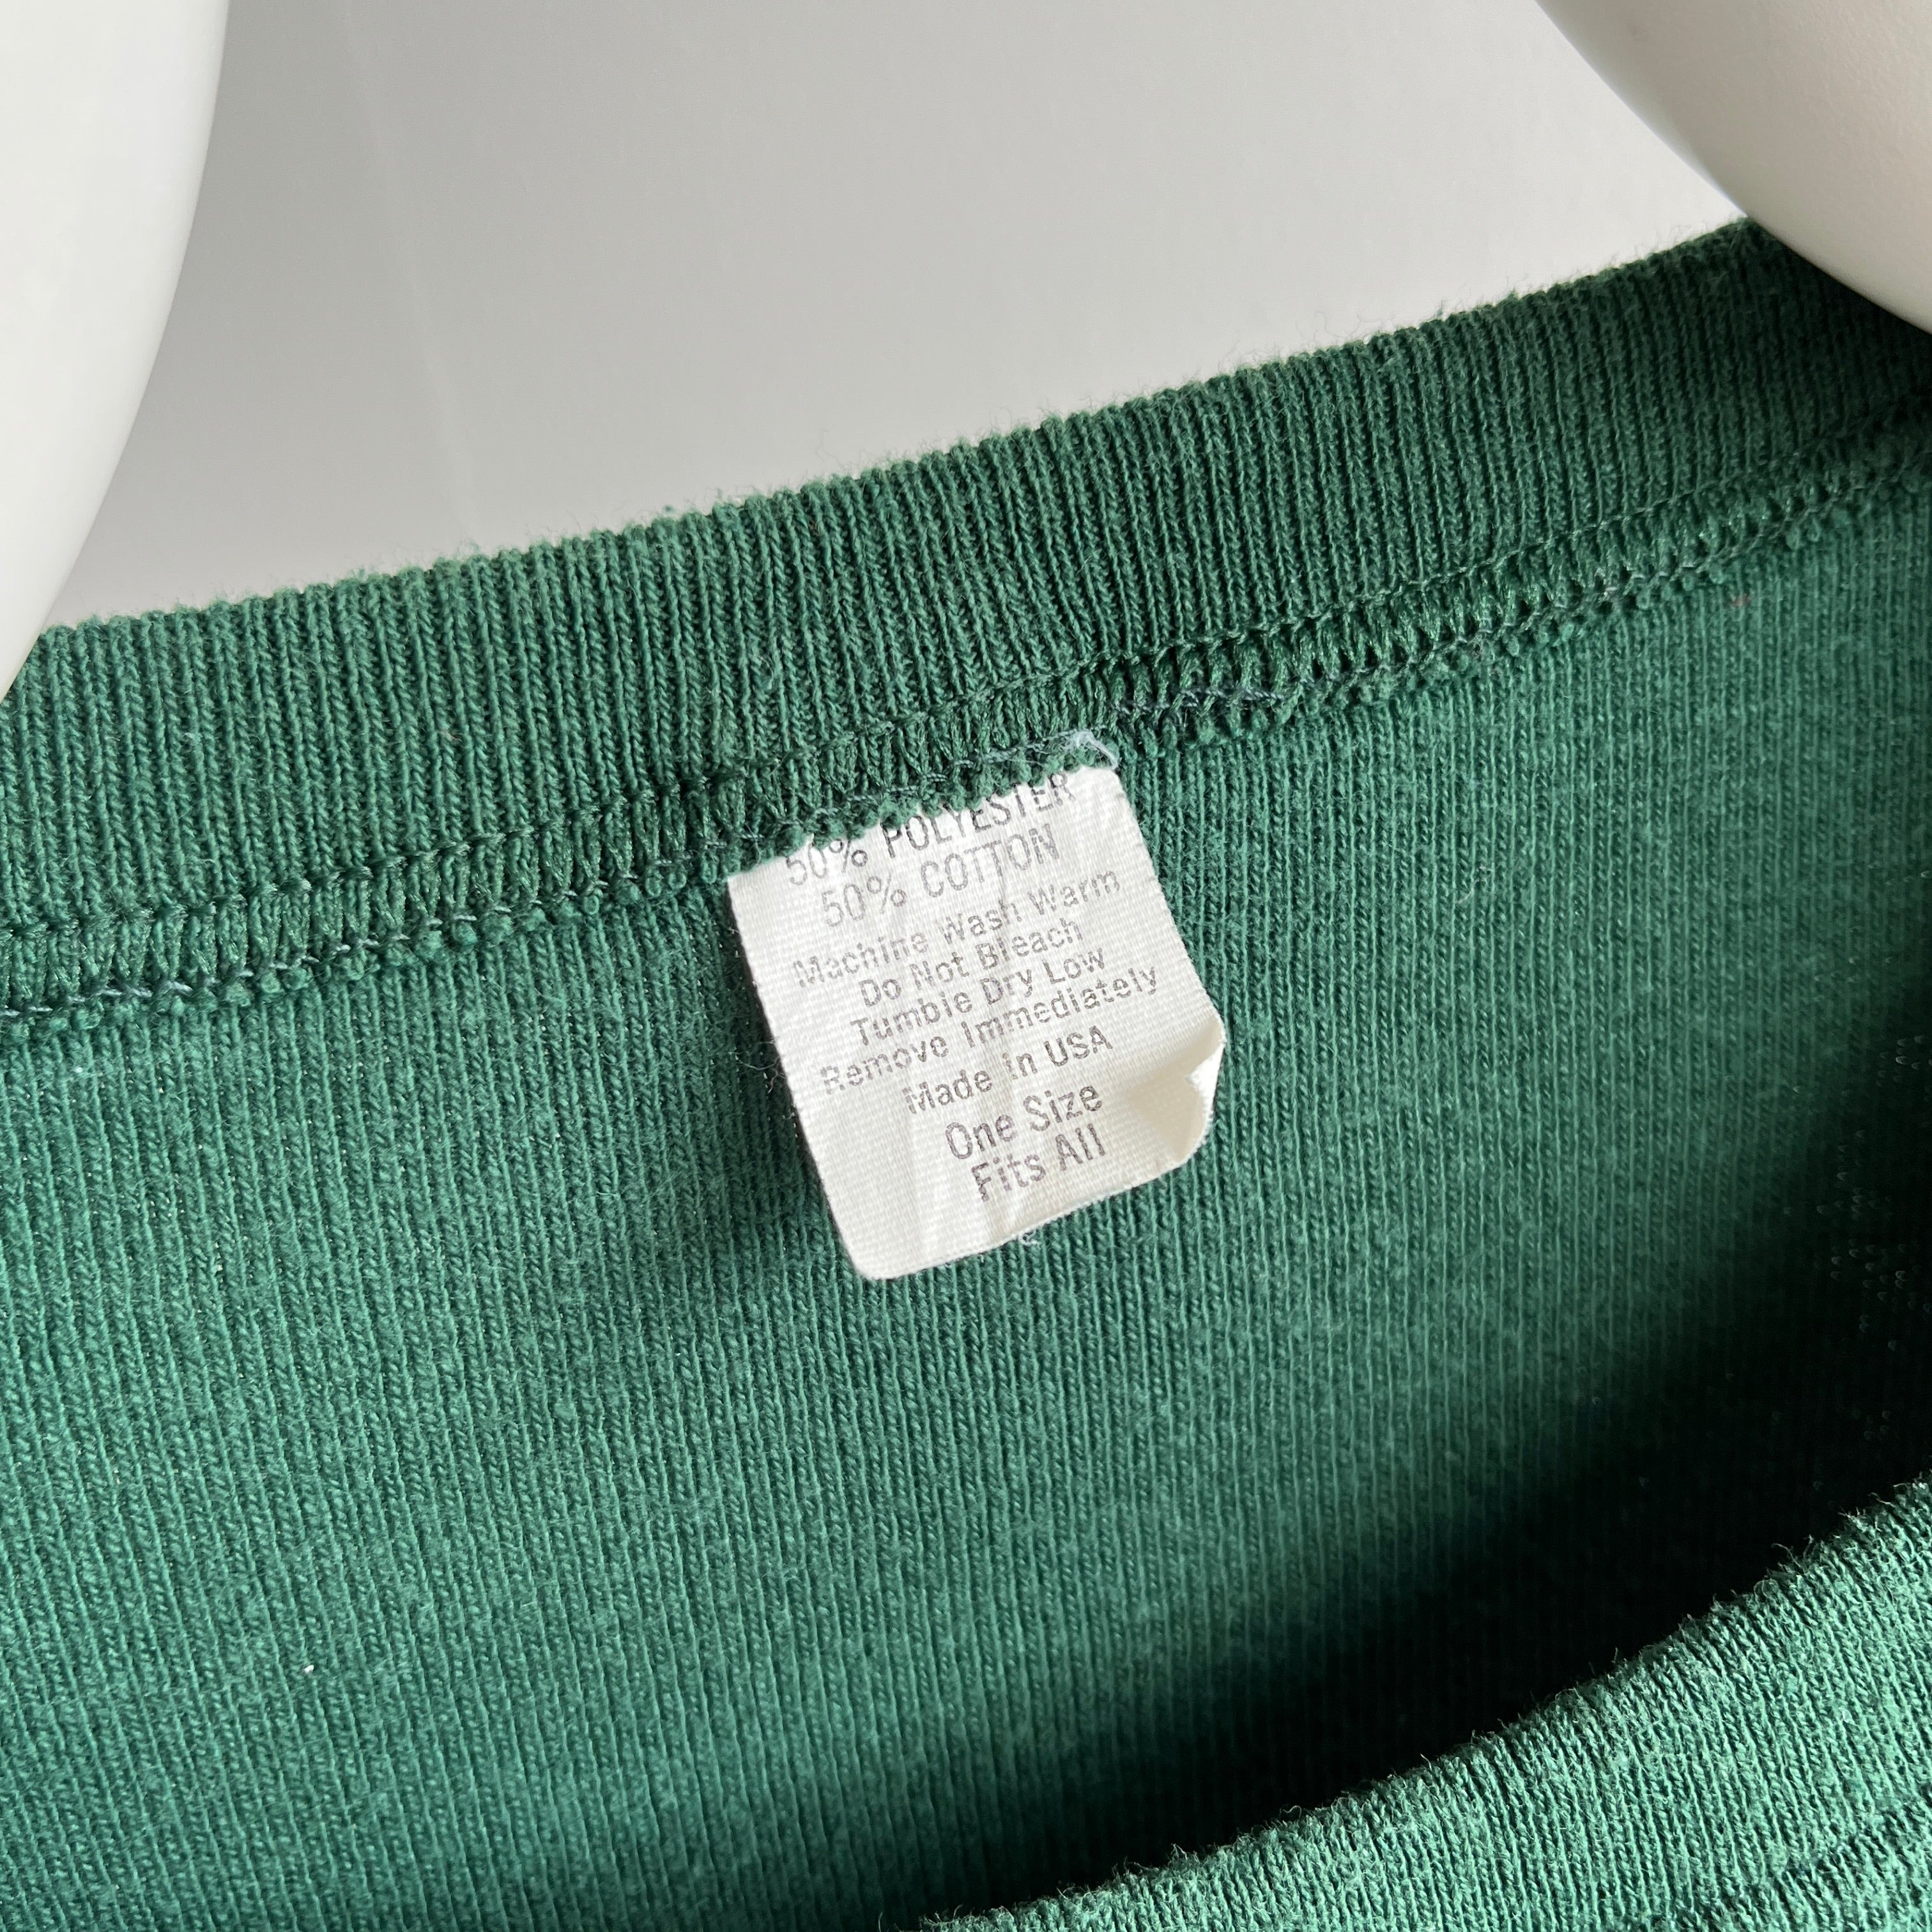 1980s One Size Fits Most Knit Deep Green T-Shirt